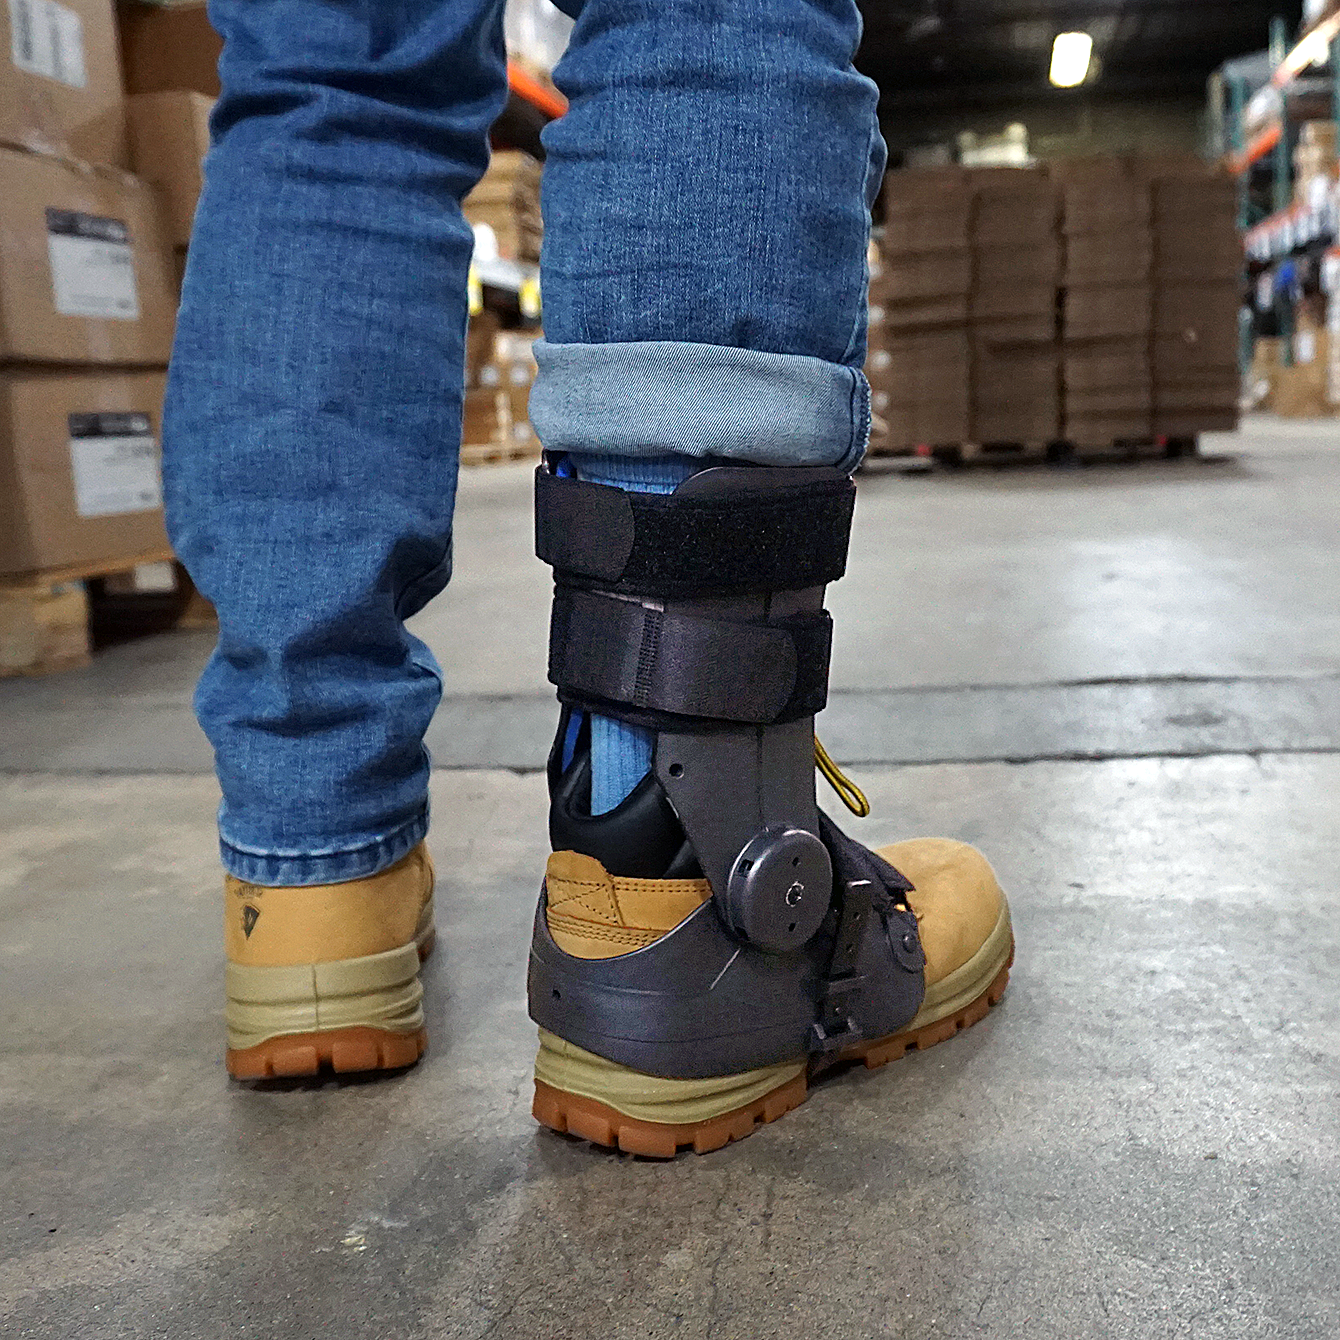 The Best Solution for Workers Compensation Patients Recovering from an Ankle Injury